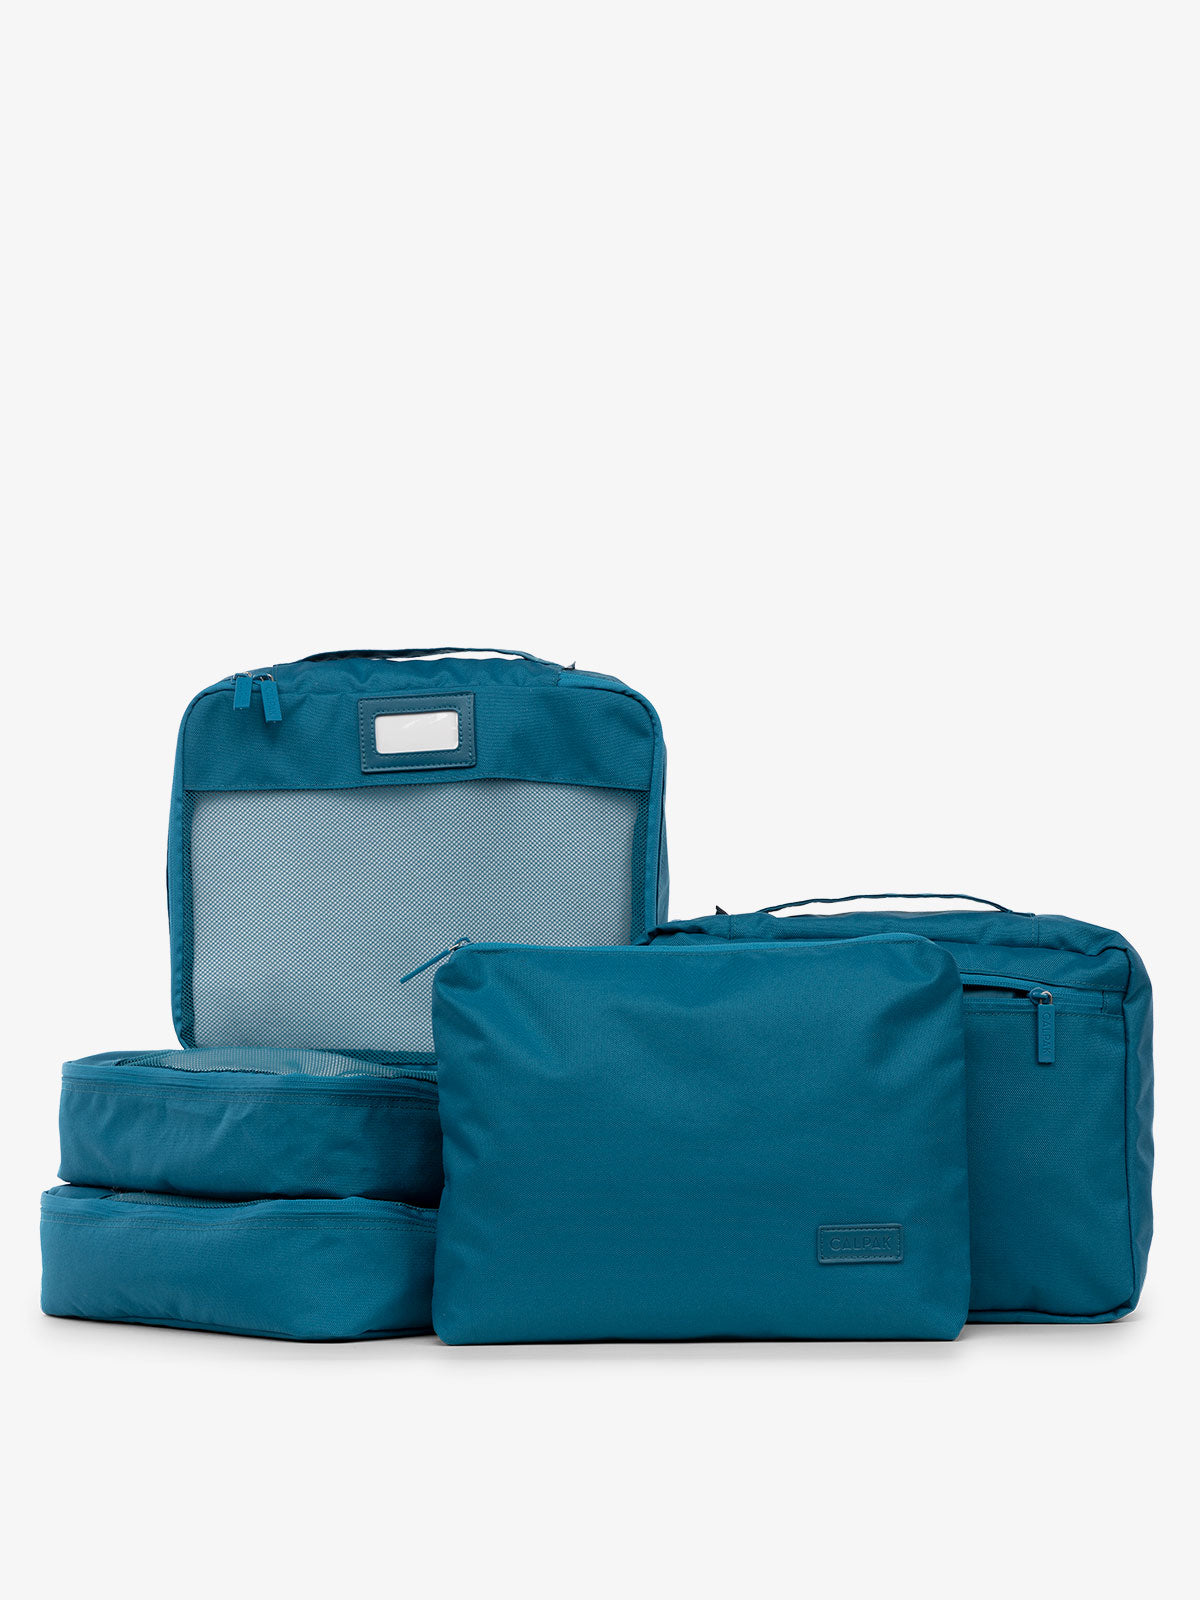 CALPAK 5 piece set packing cubes for travel with labels and top handles in lagoon